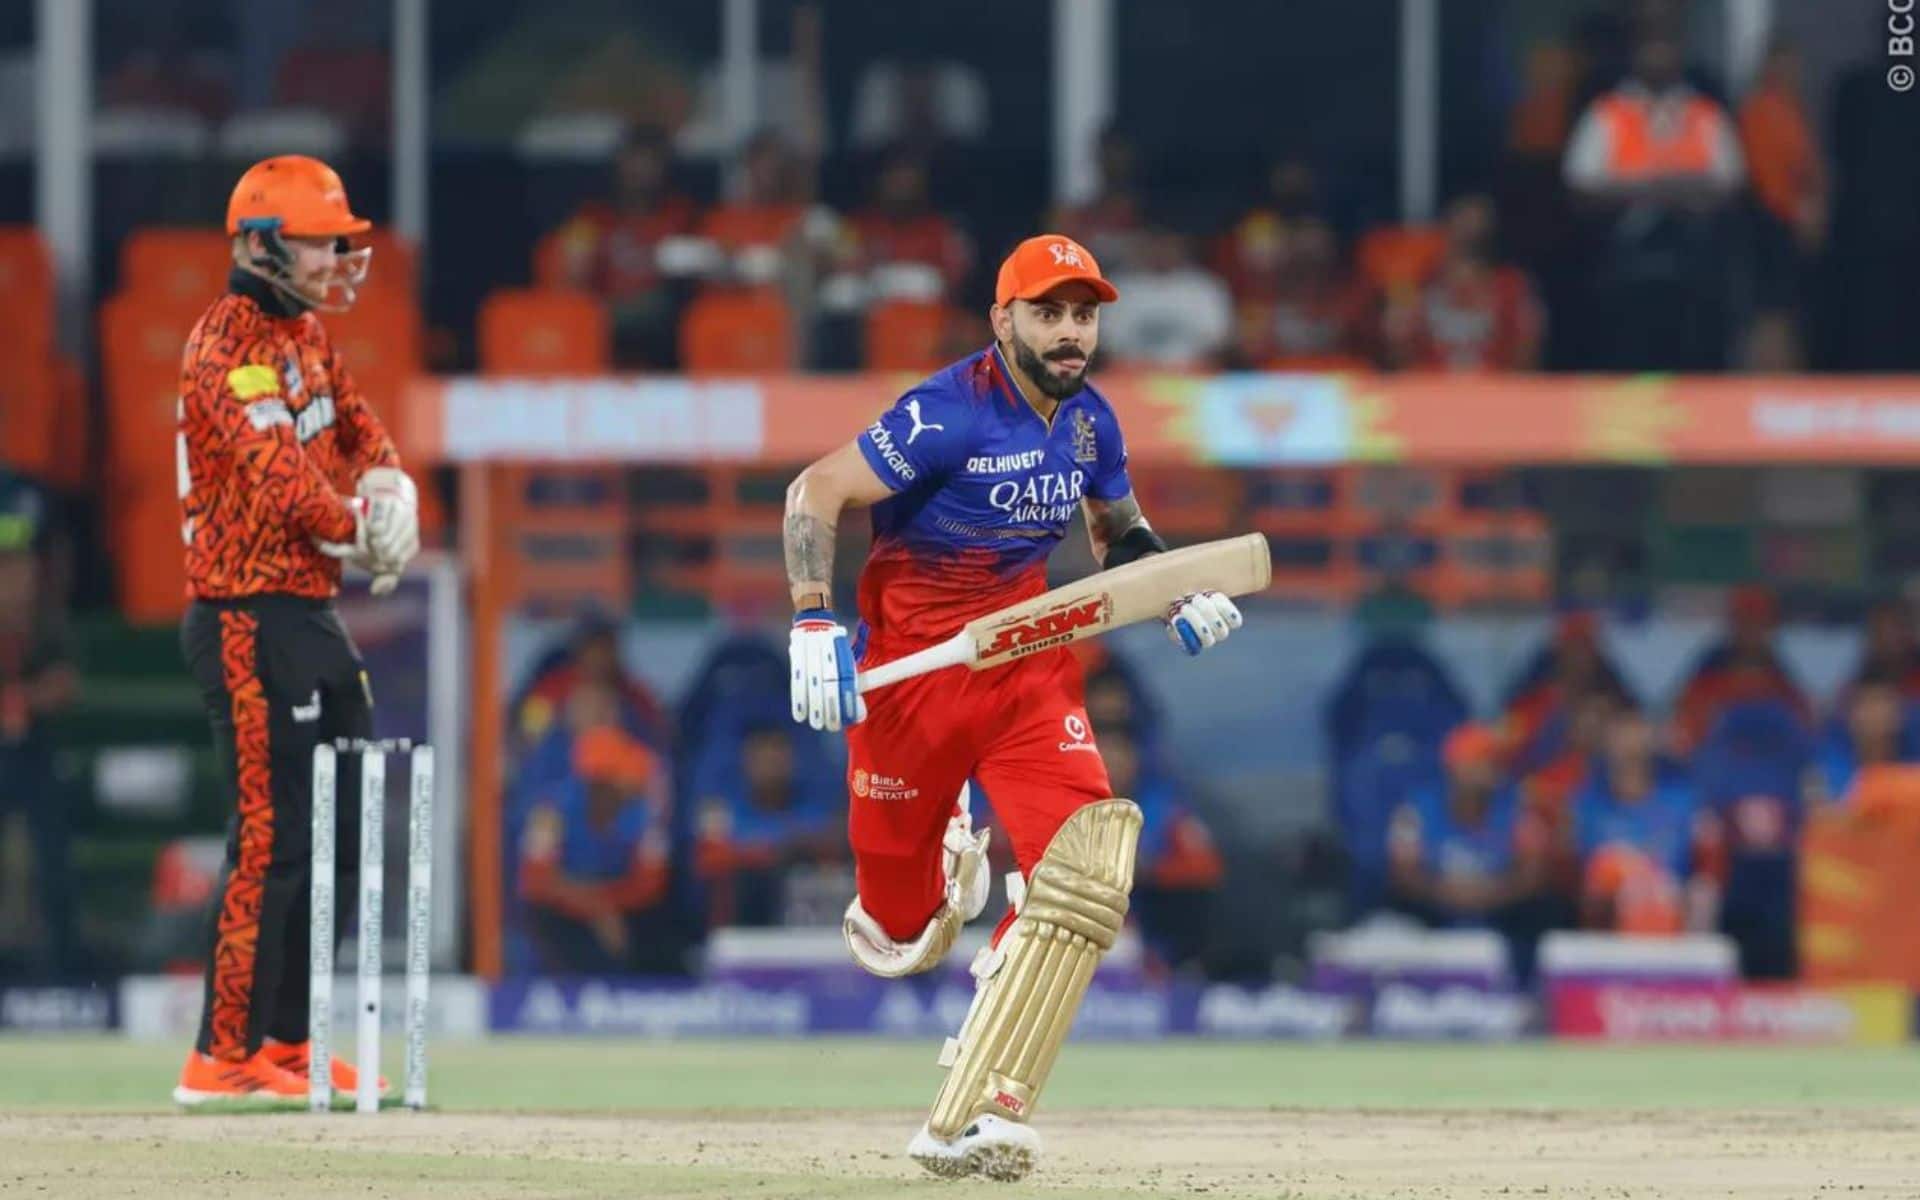 'Not What Your Team Expects From You': Indian Legend Criticises Kohli's Lack Of Intent Vs SRH